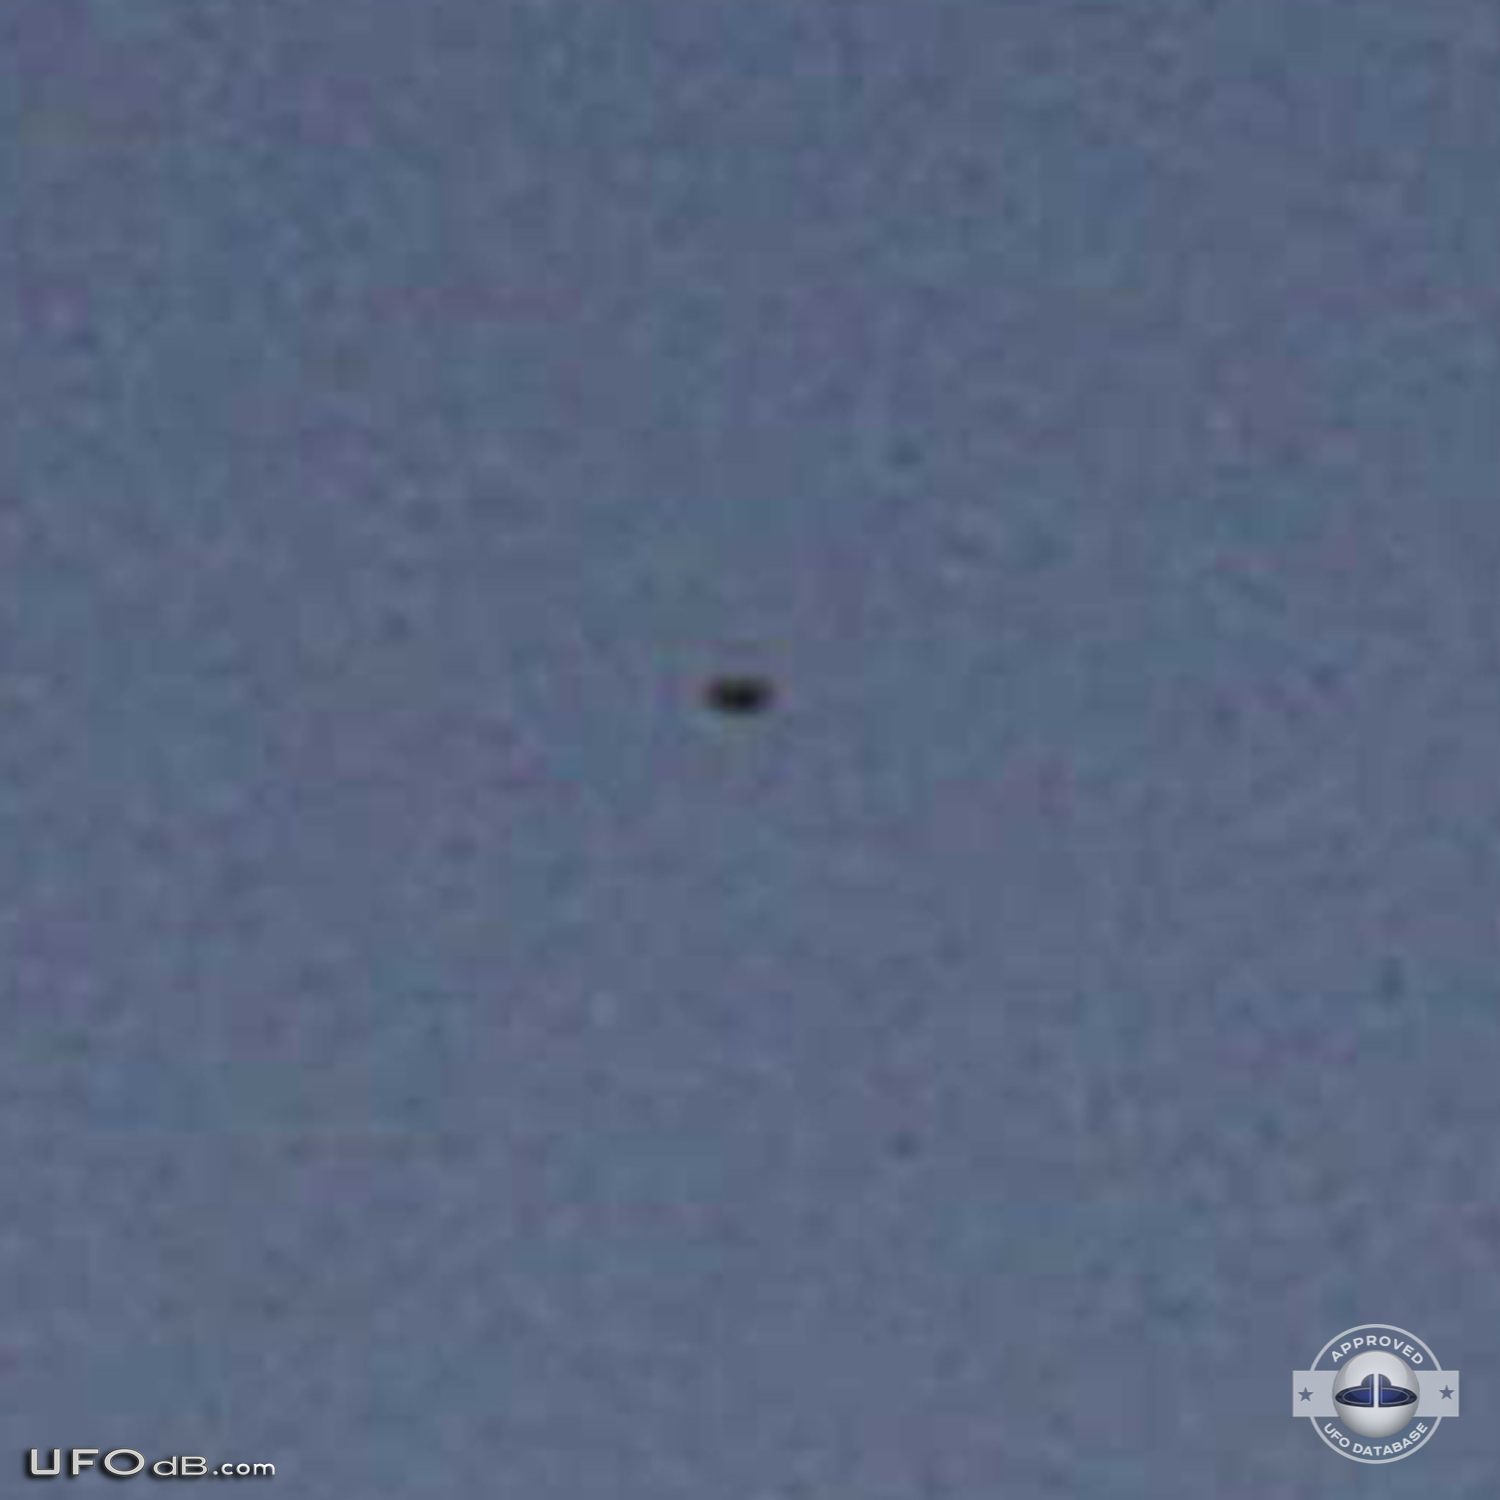 Kids picture captures a passing UFO in the sky of Cayo Chile in 2007 UFO Picture #435-3